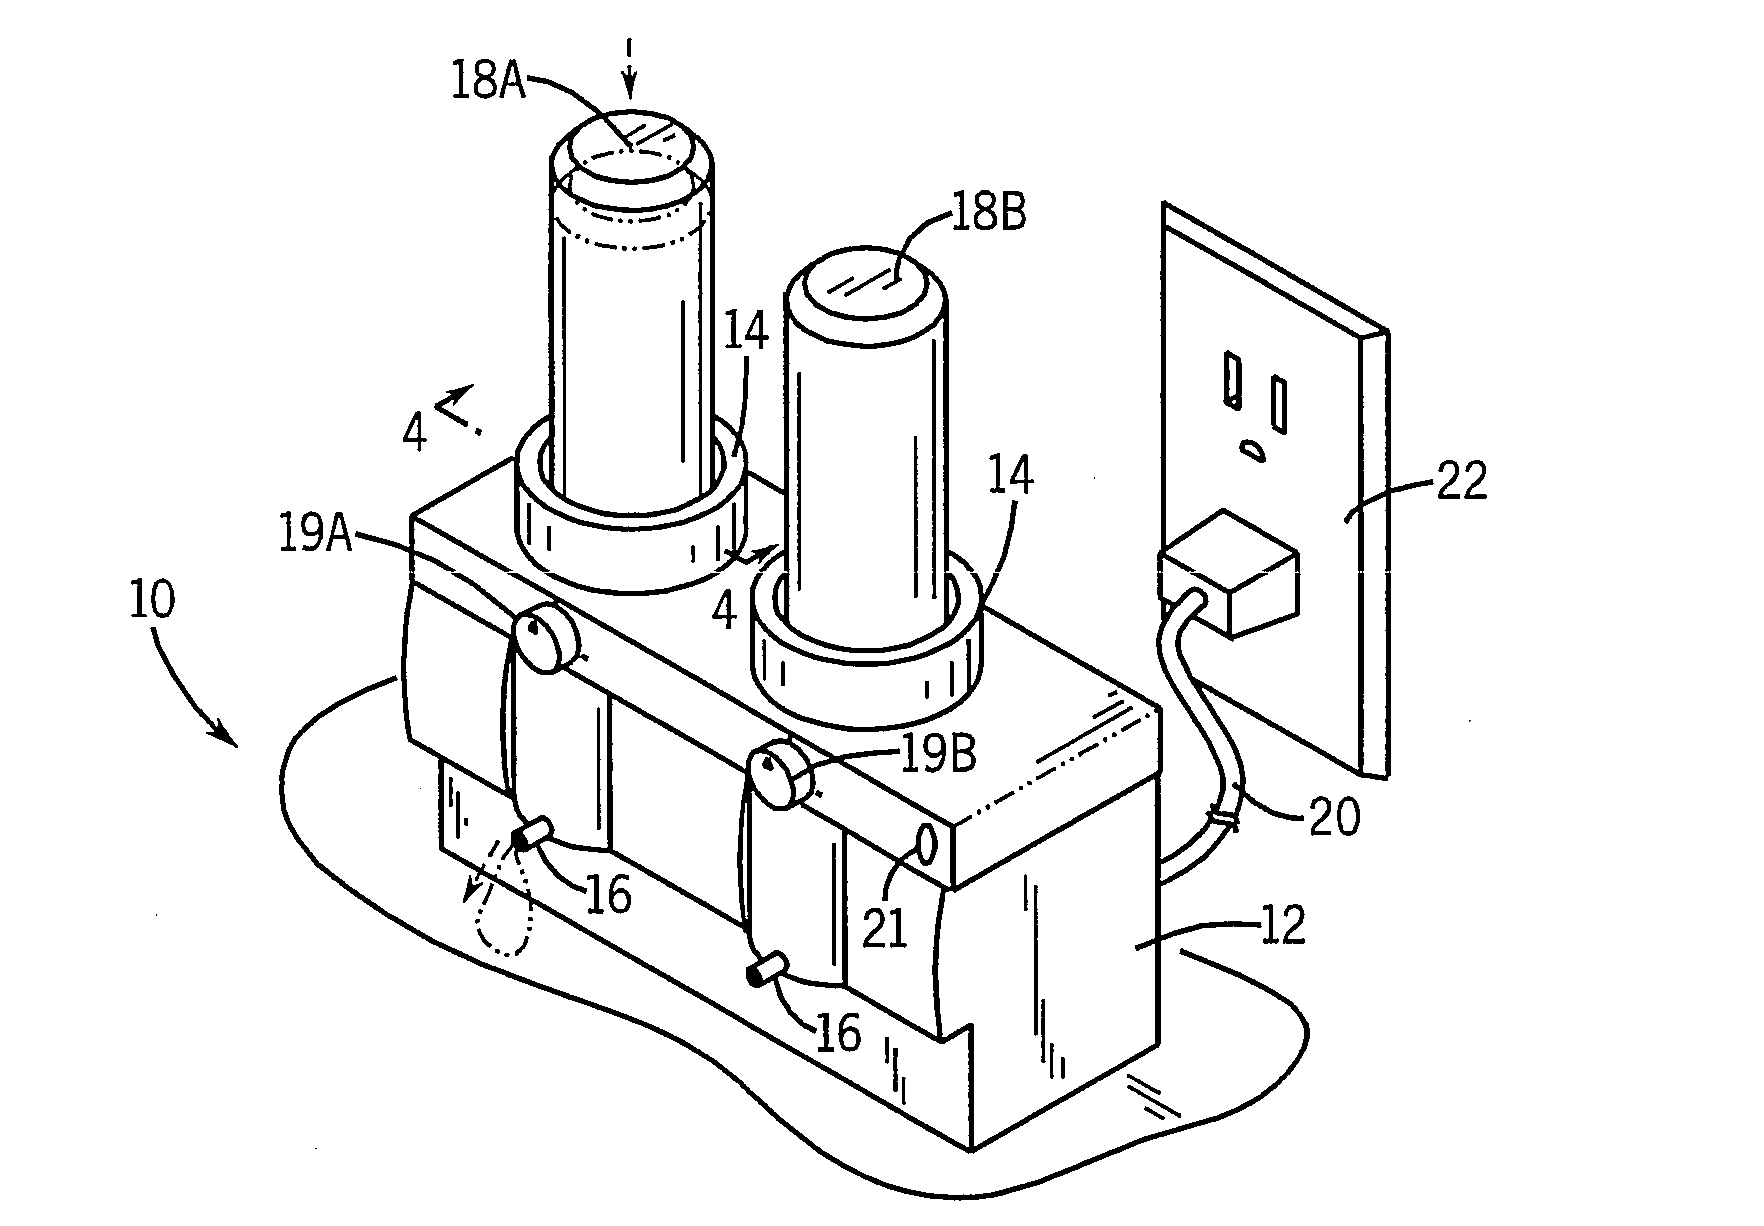 Dispensing Device For Heated Flowable Product